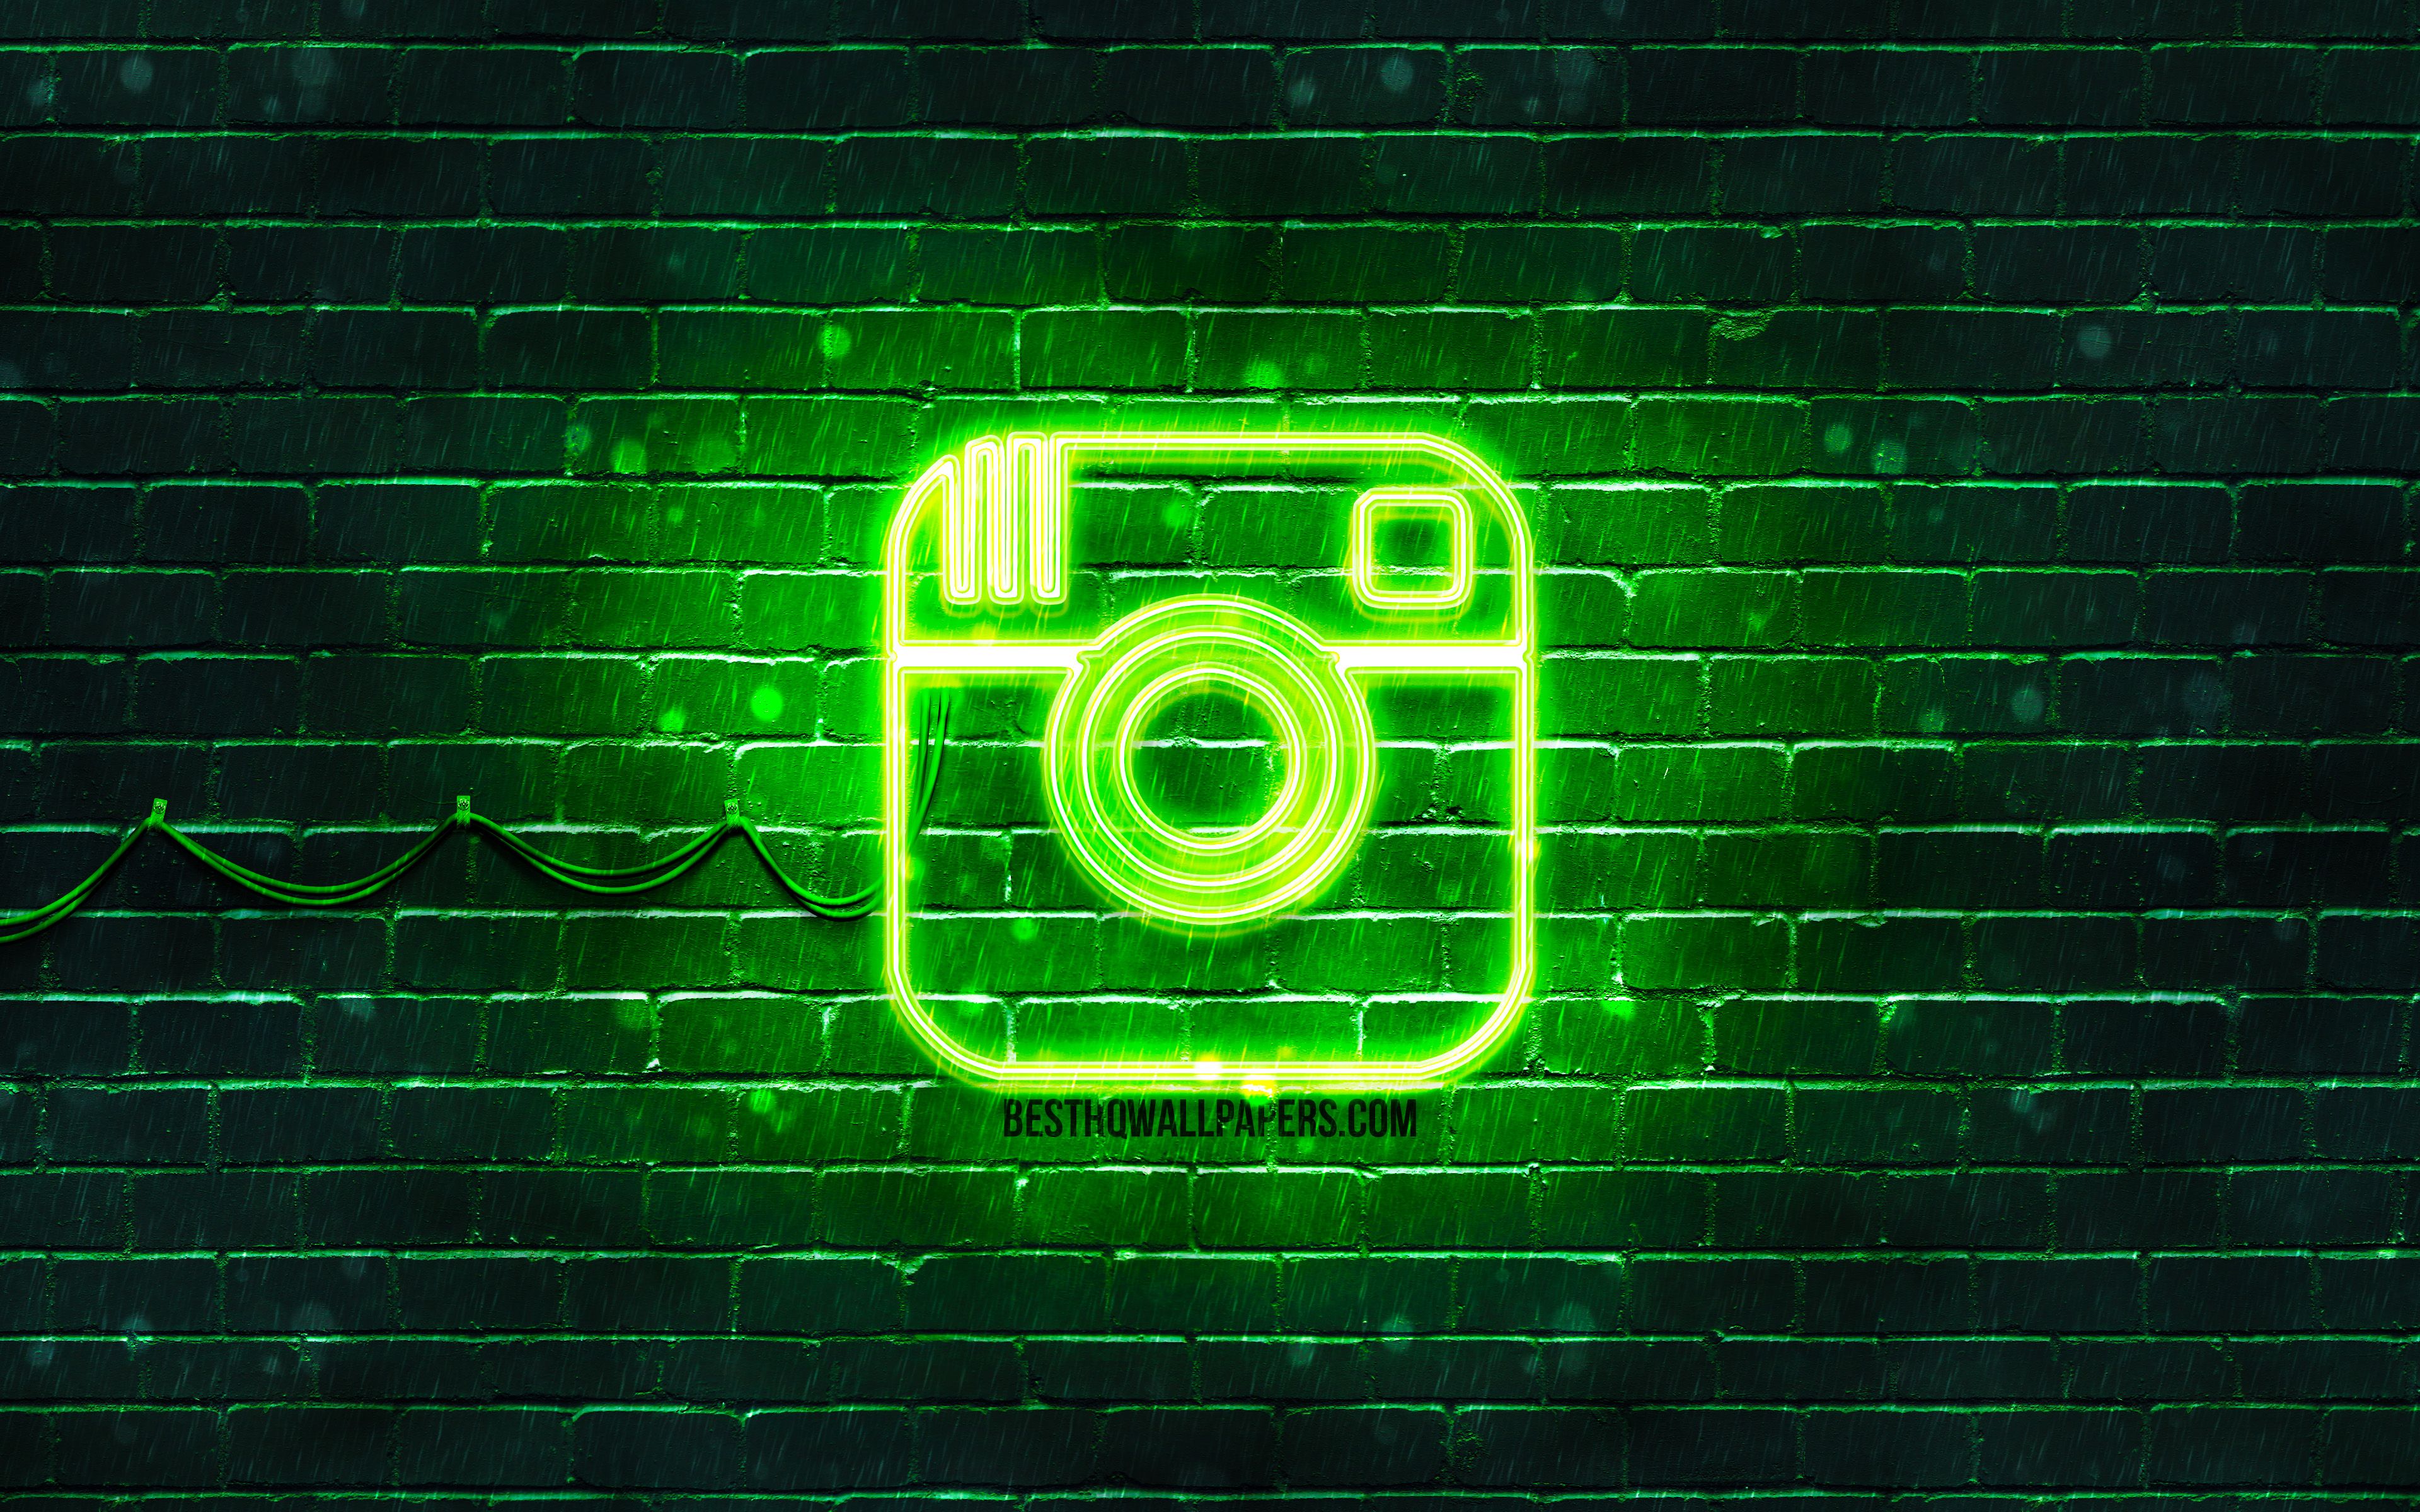 Download wallpaper Instagram green logo, 4k, green brickwall, Instagram logo, brands, Instagram neon logo, Instagram for desktop with resolution 3840x2400. High Quality HD picture wallpaper